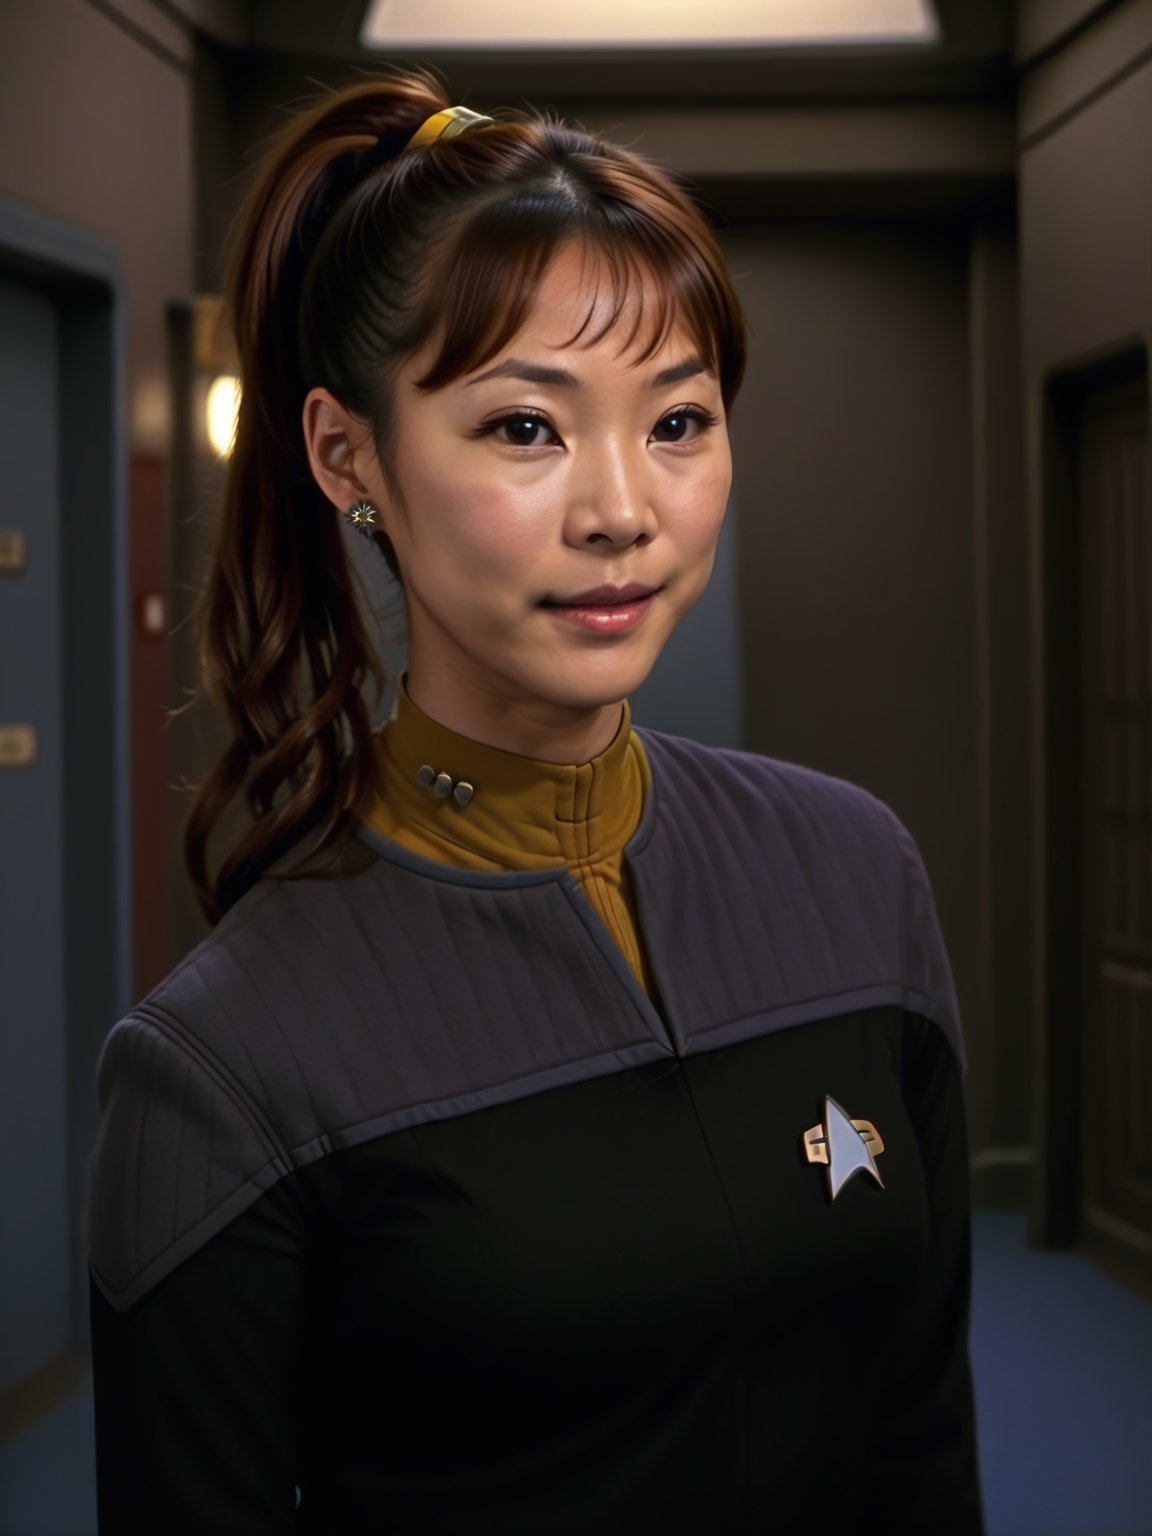 asian woman,brown hair,ponytail,black and grey ds9st uniform,yellow collar,in a hallway